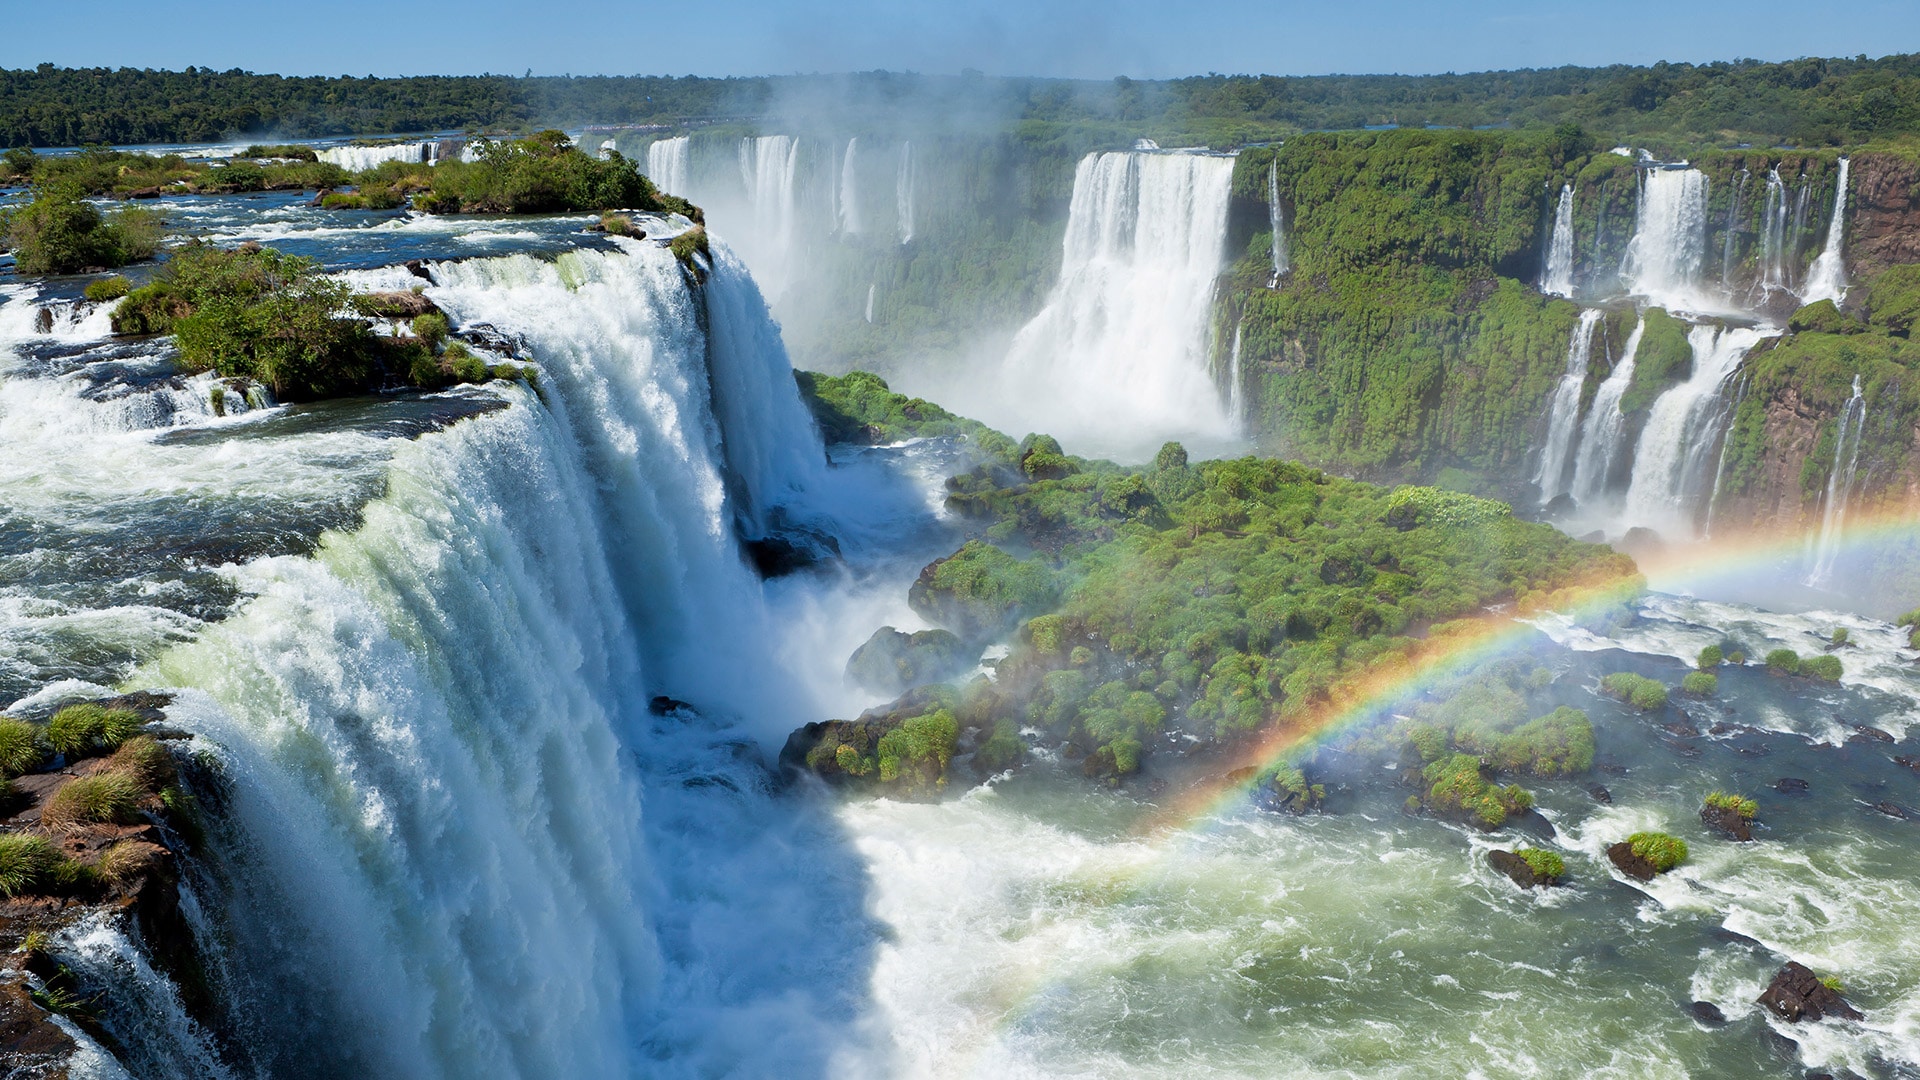 Tourists enjoying a boat ride at the base of Iguazu Falls, experiencing the powerful mist and rainbows.